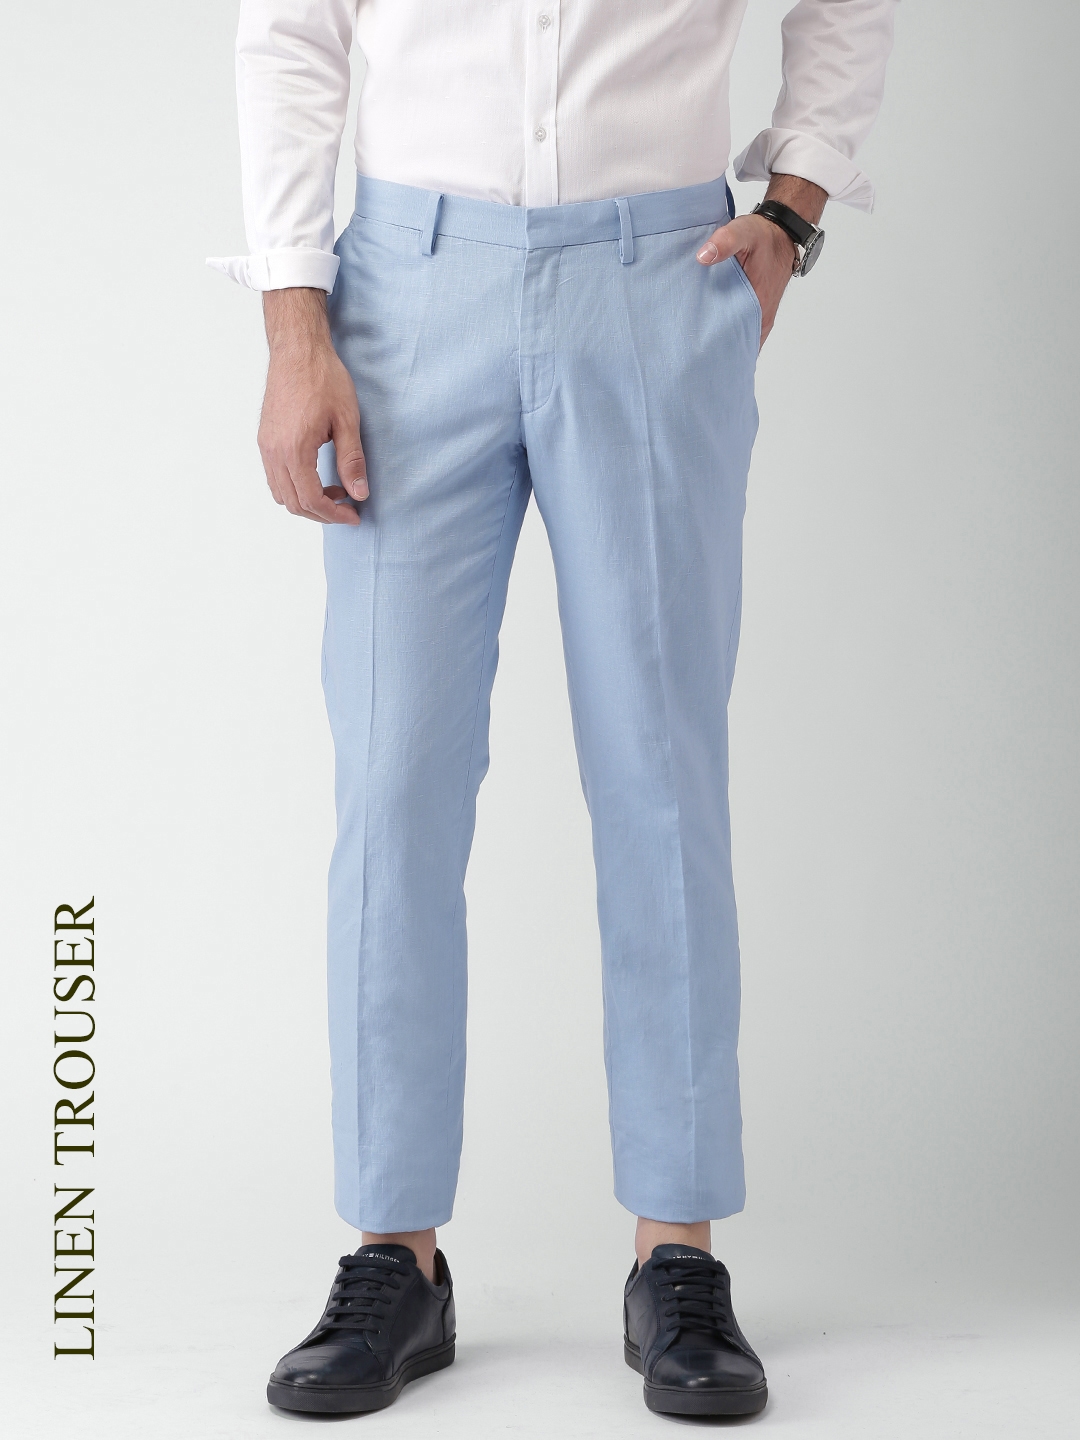 19 All Shades of Blue Pants Outfits for Men ideas | mens outfits, mens  fashion, menswear